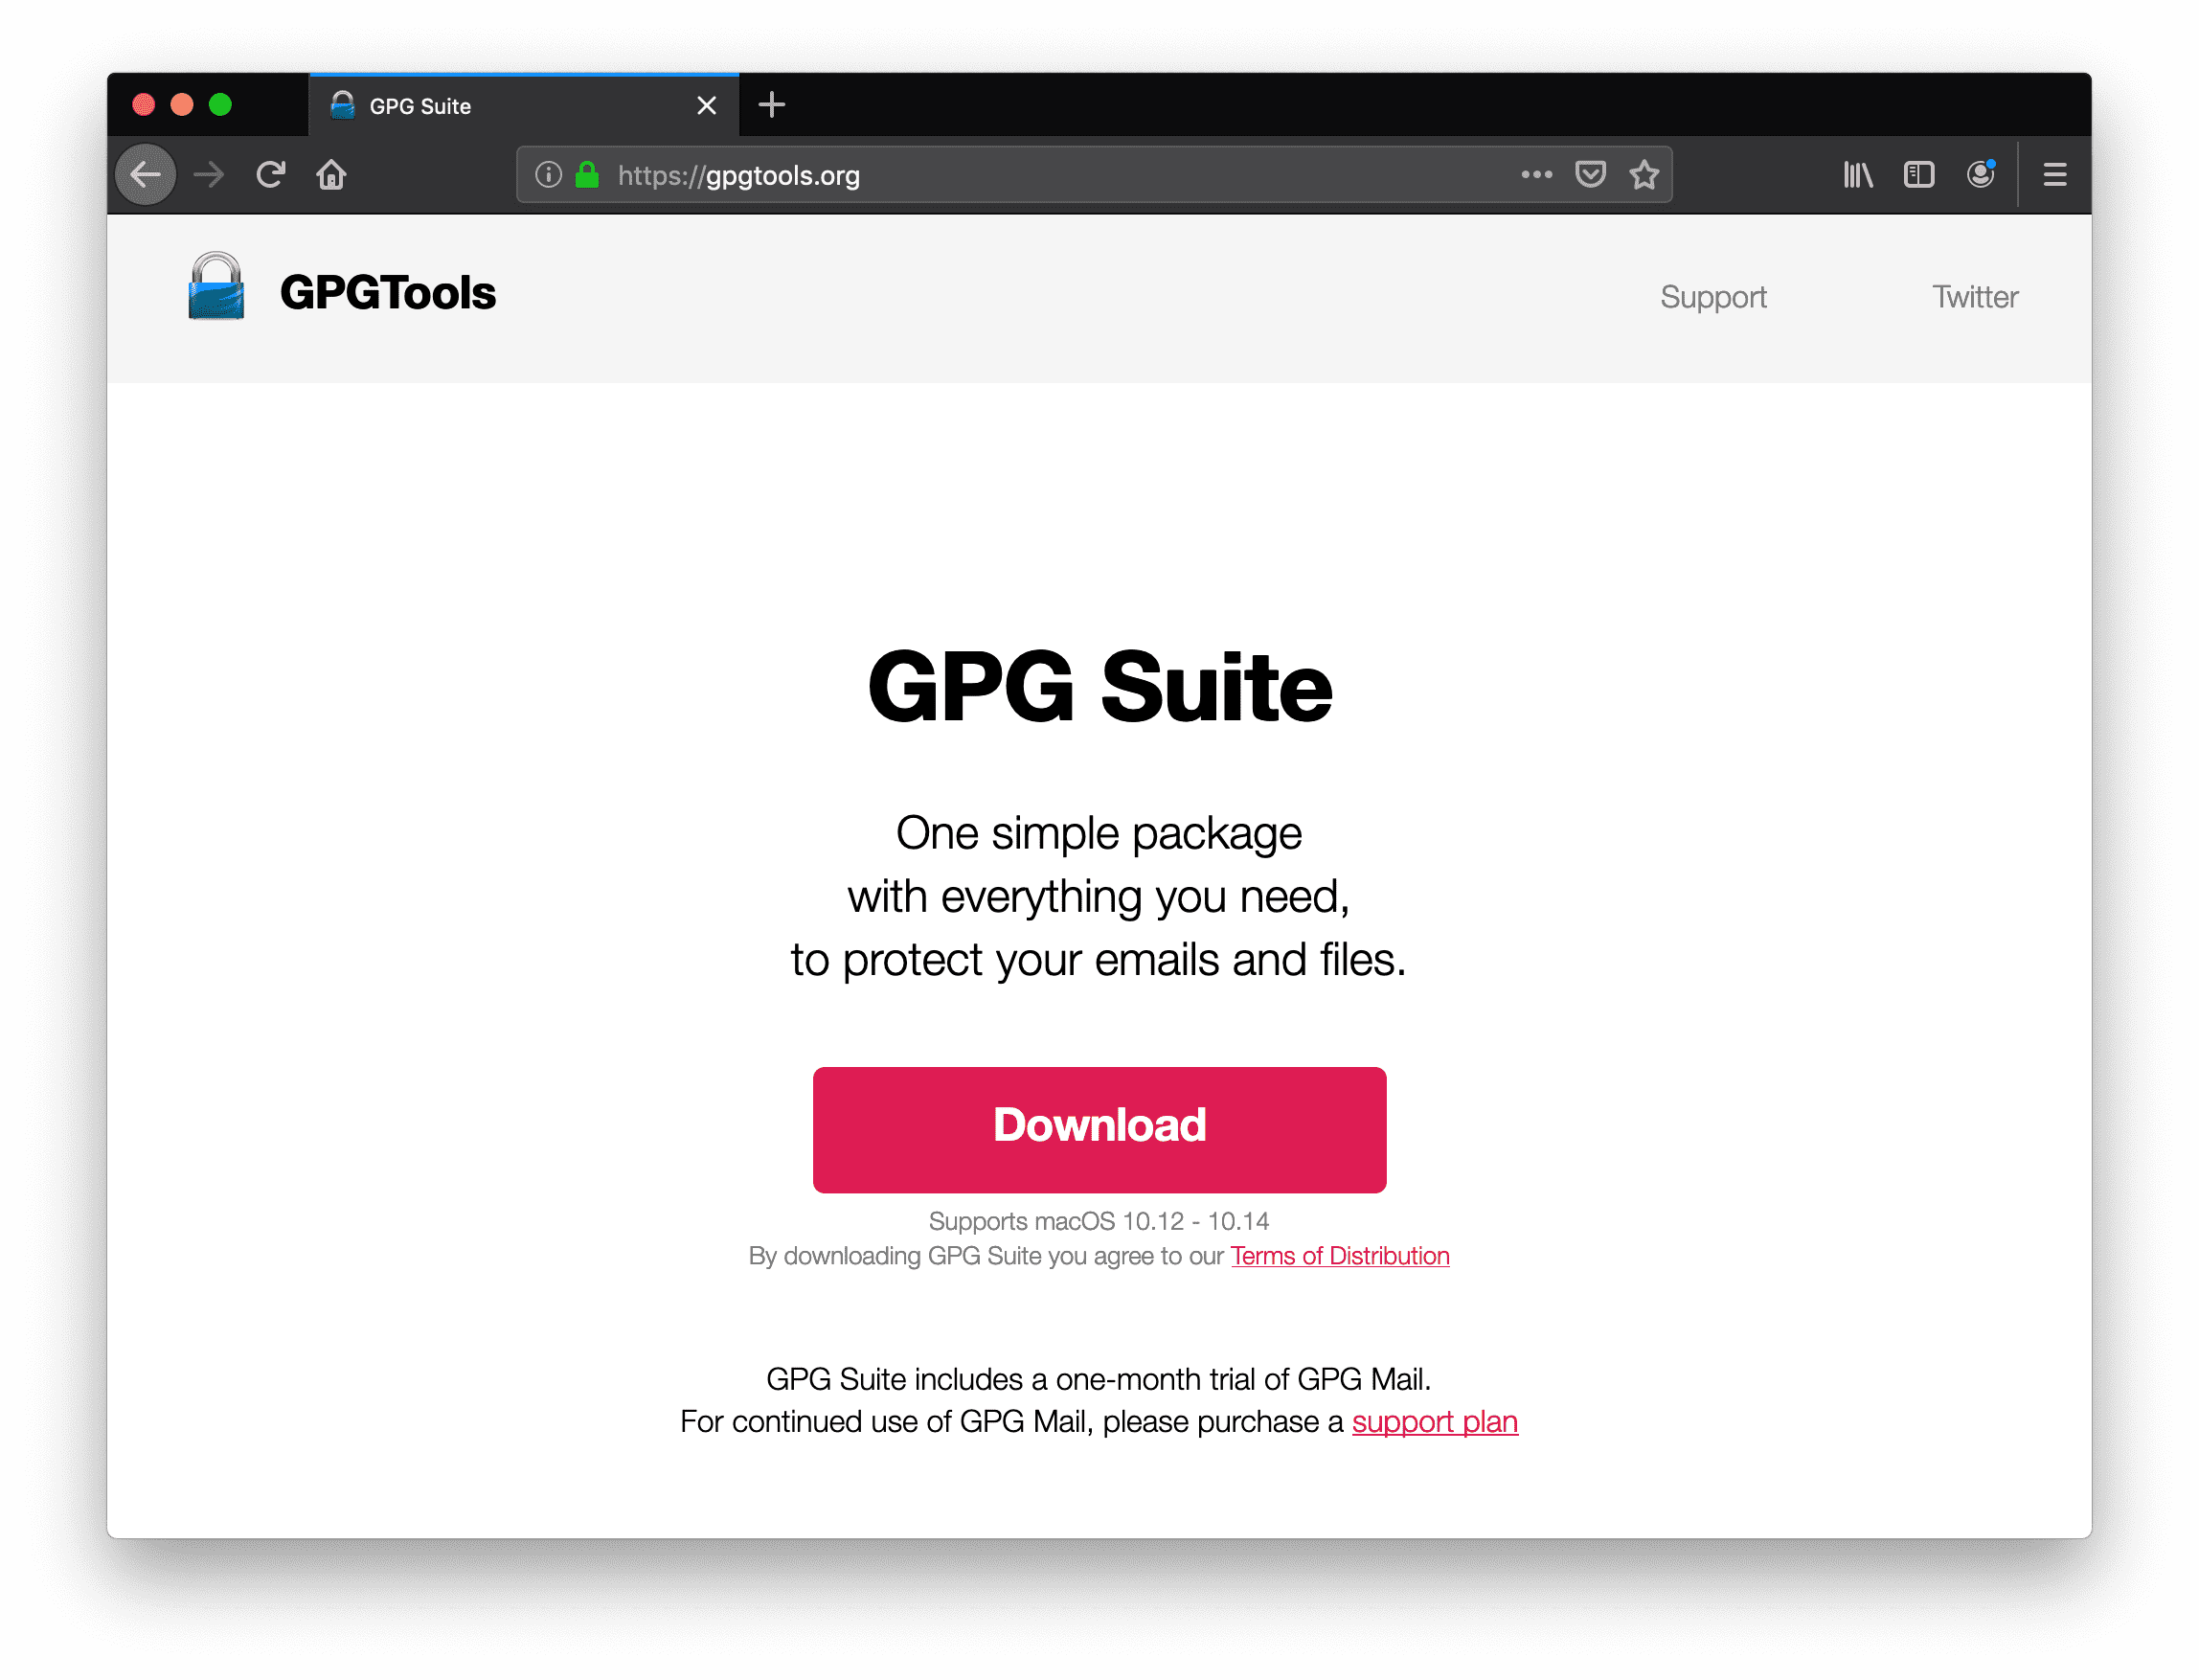 gpg suite from gpgtools